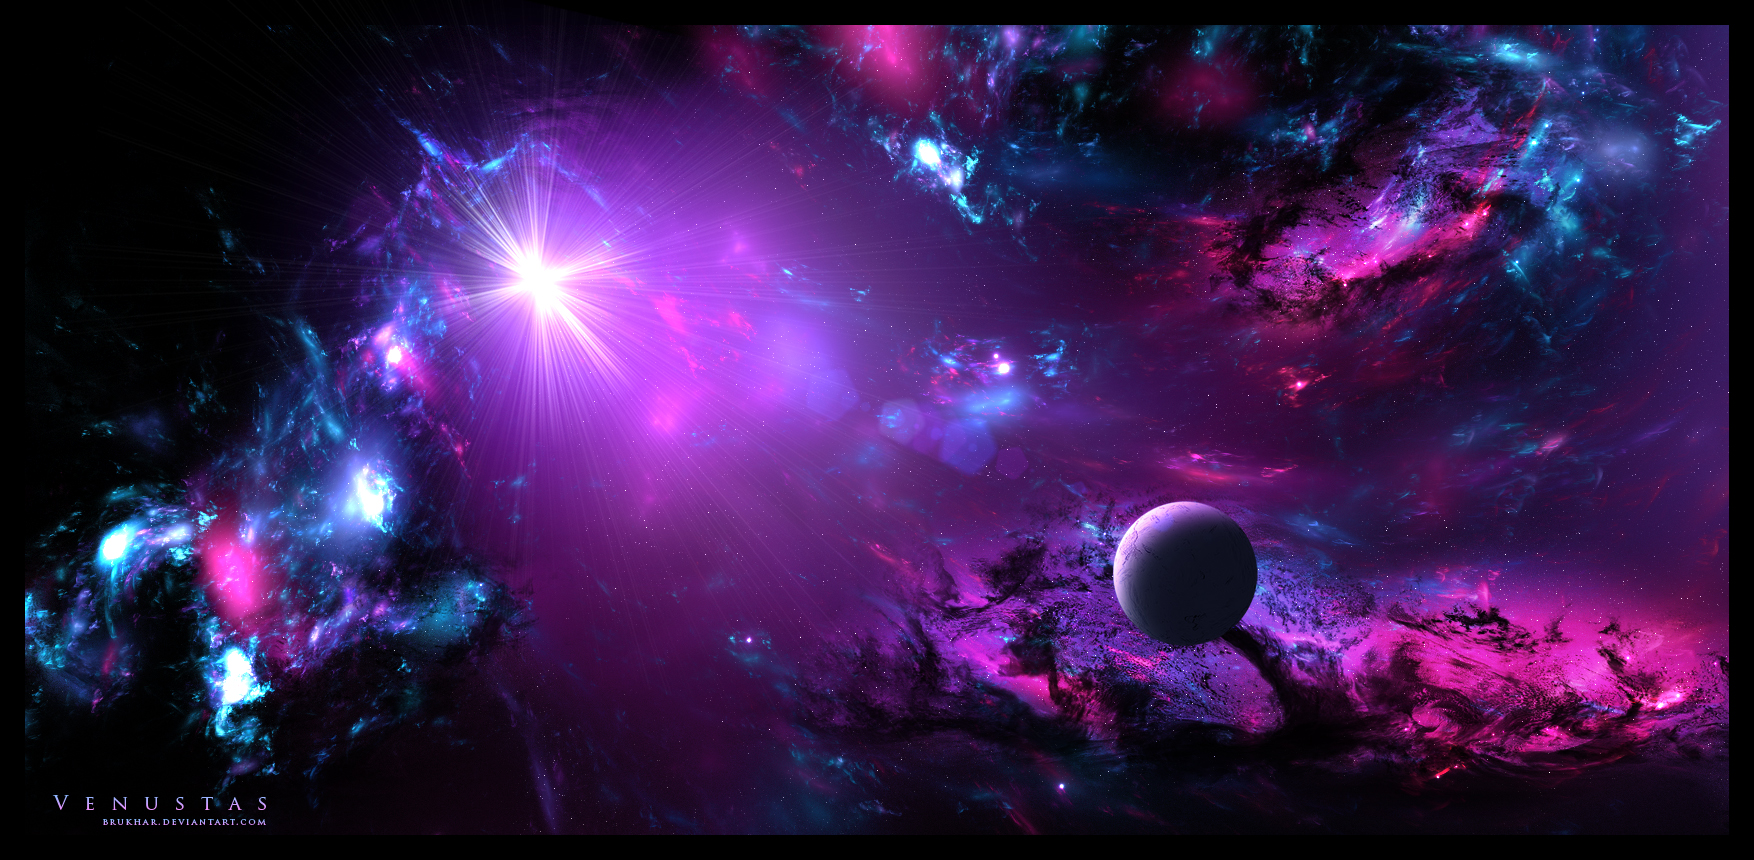 SpaceFantasy Wallpaper Set 21 Awesome Wallpapers